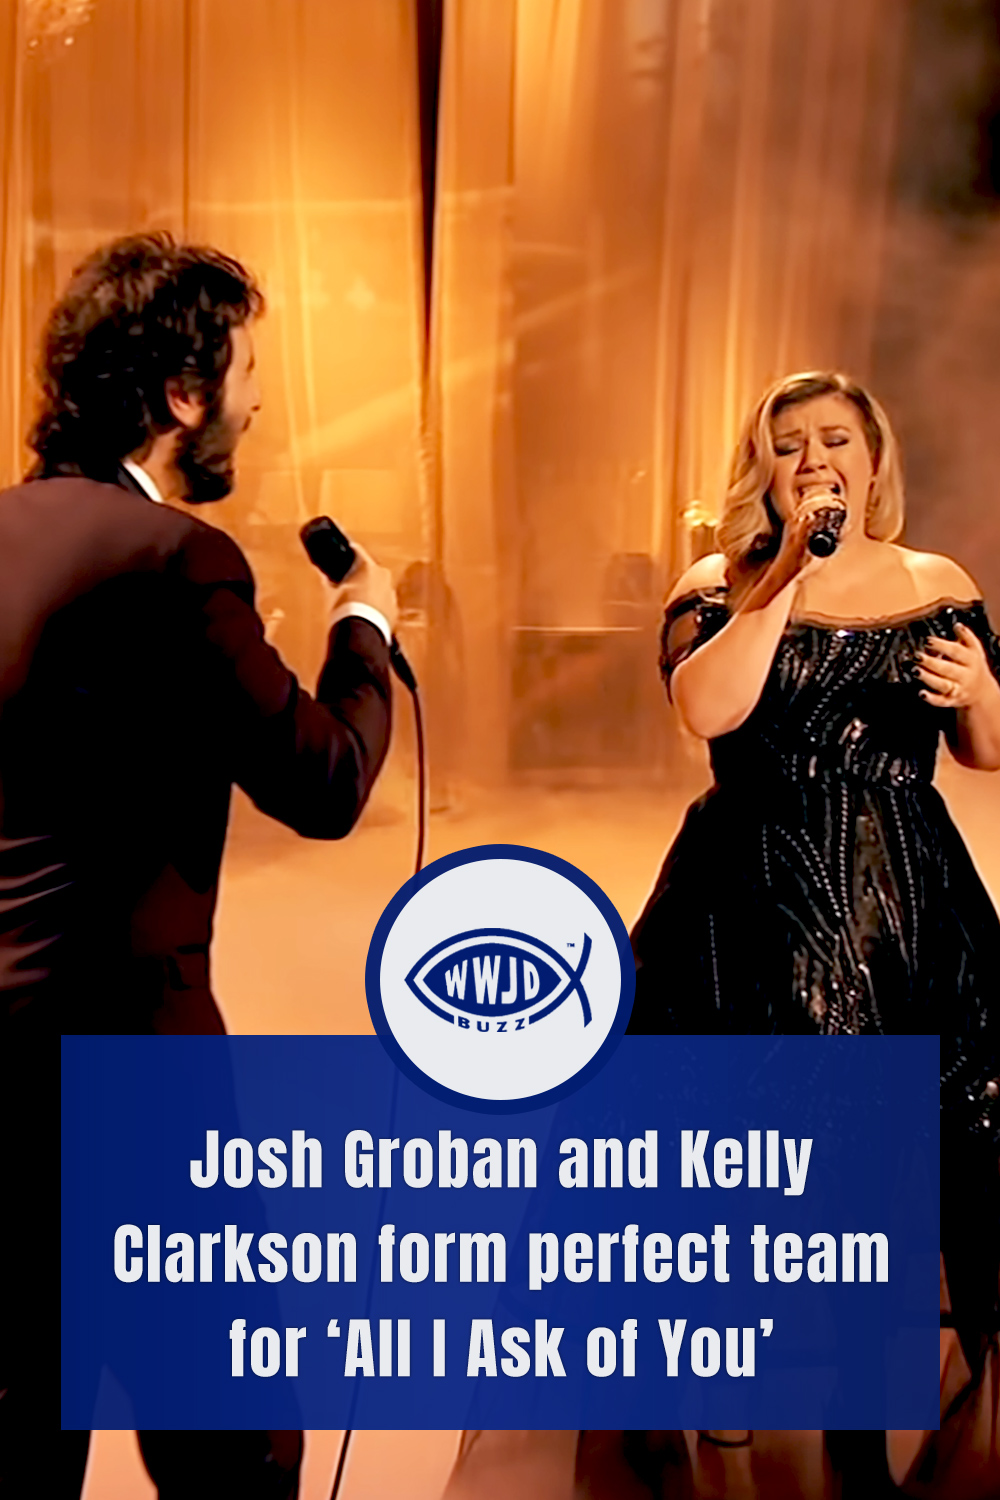 Josh Groban and Kelly Clarkson form perfect team for ‘All I Ask of You’